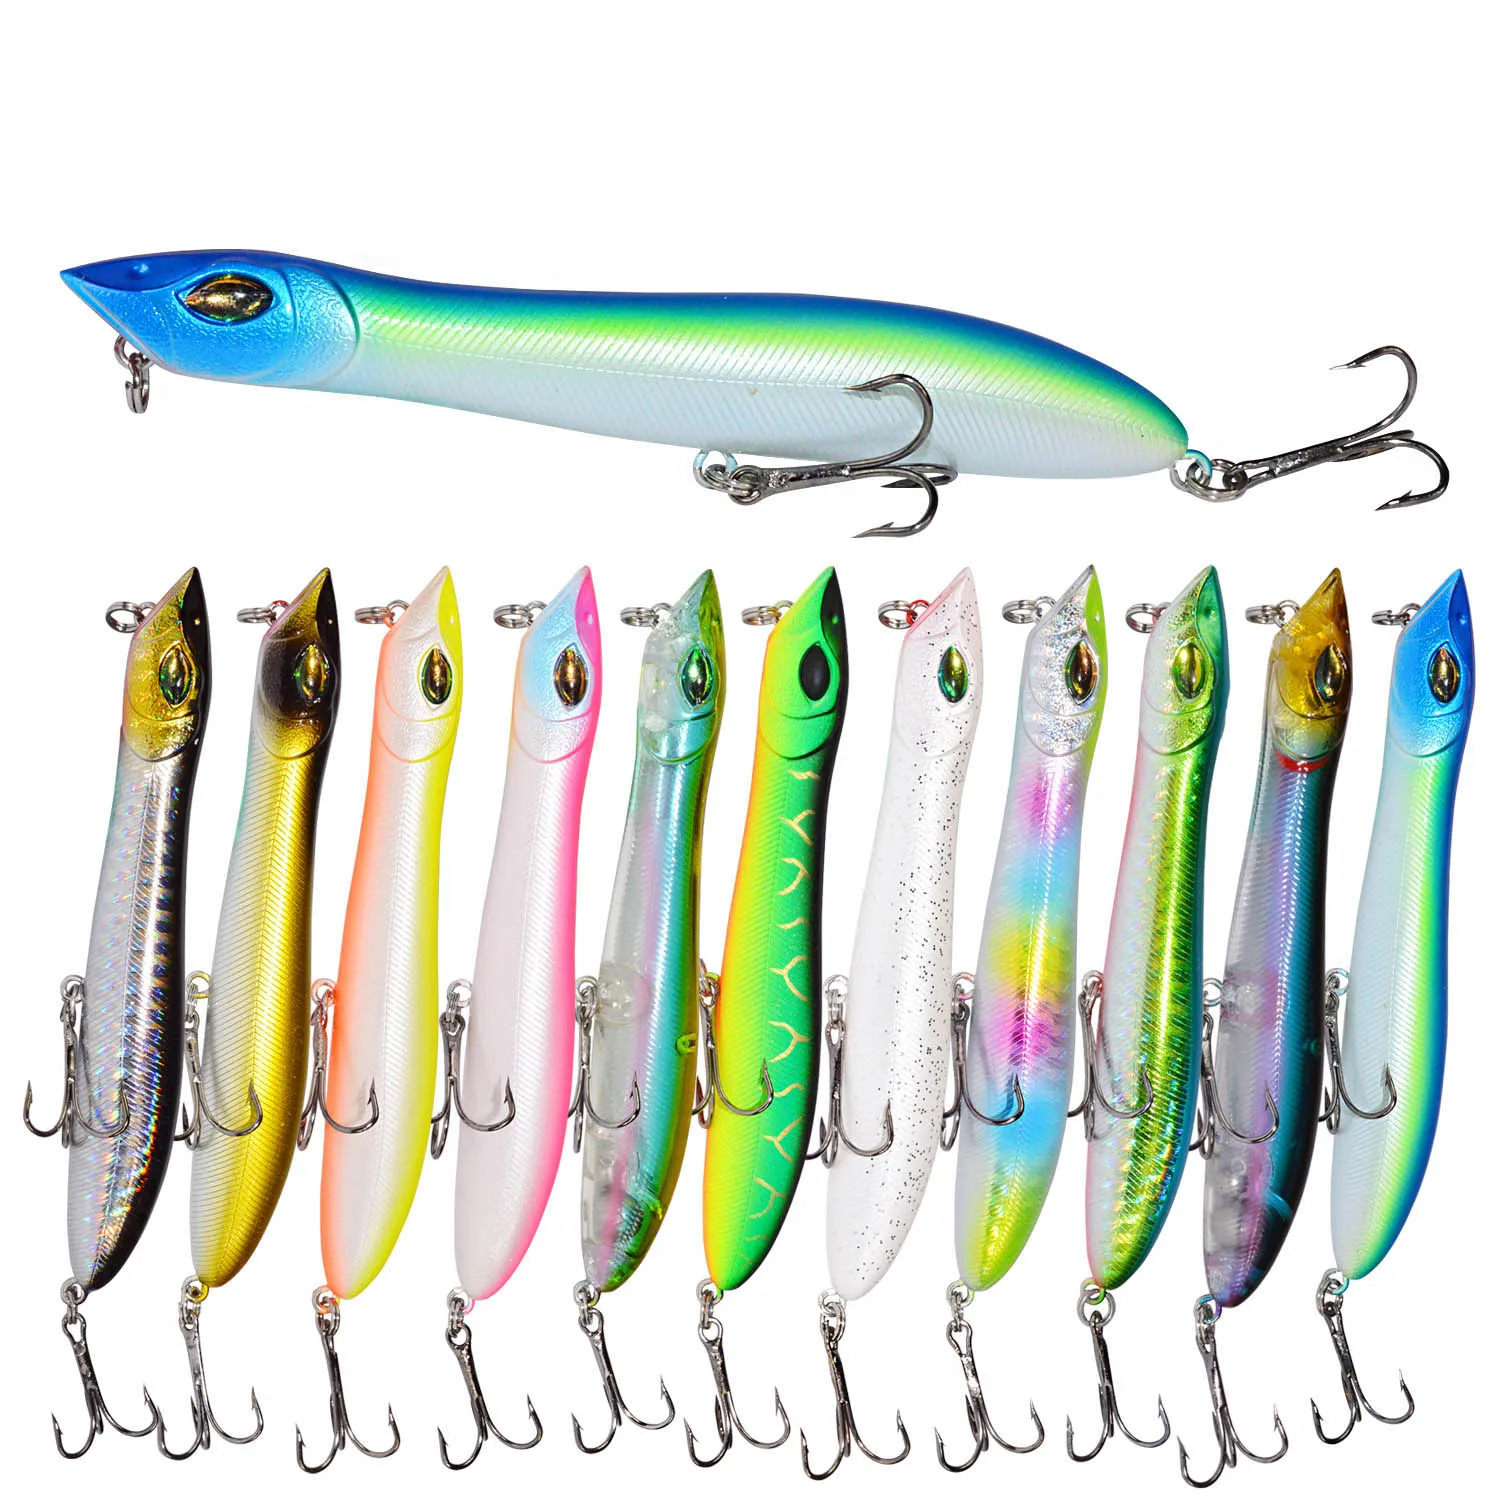 

Hard Lure 106mm 10g Fishing Lure Snake Head Popper Bait Plastic Baits Lure Fishing Peche Iscas Artificial Para Pesca Fodder, 13colors